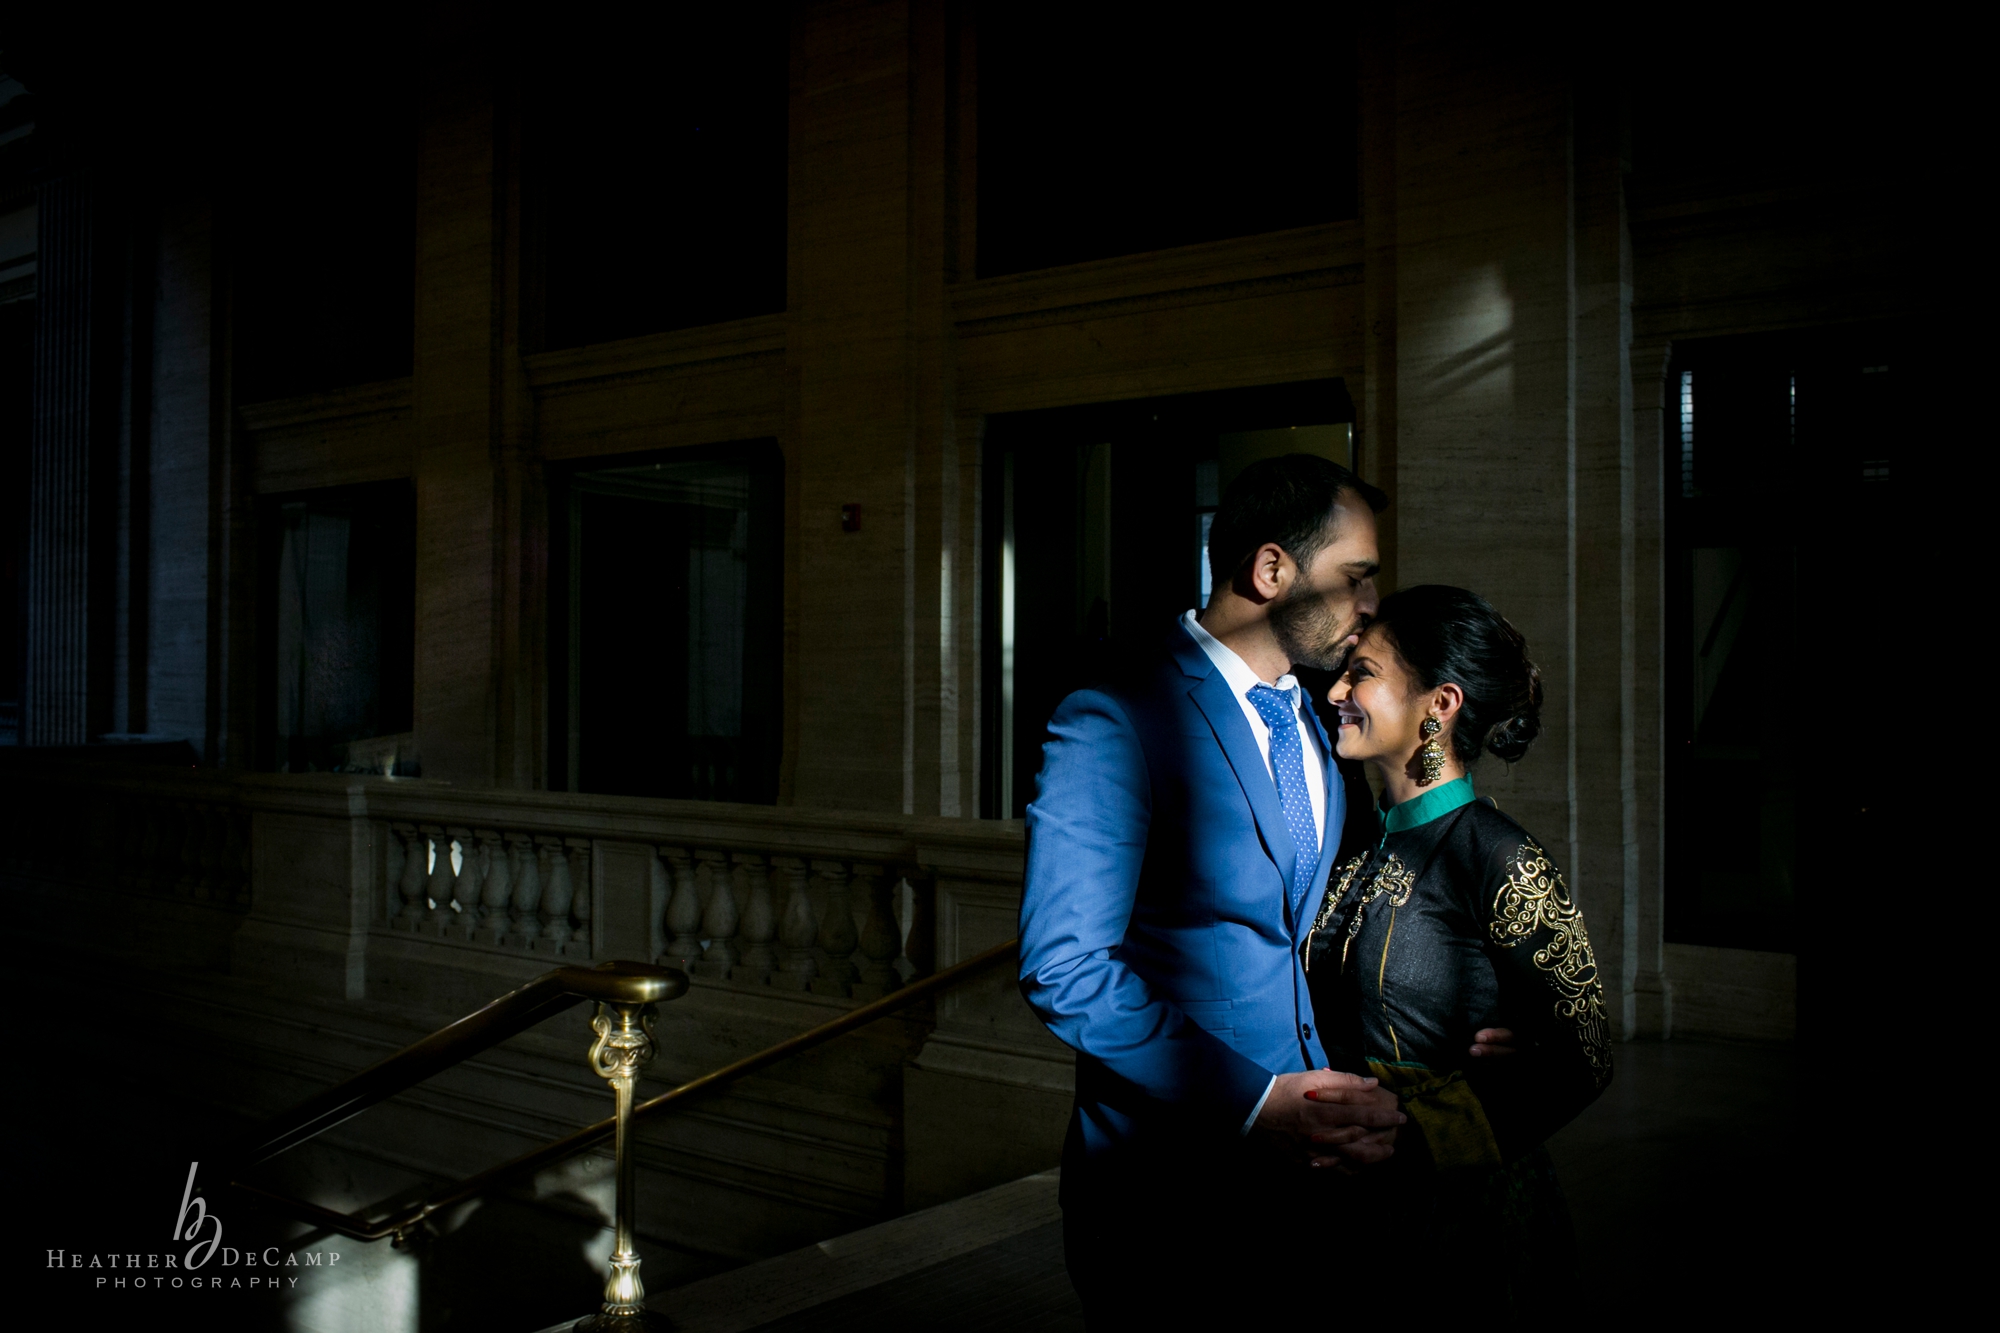 Engagement photos taken by Heather DeCamp at Chicago Union Staiton; Chicago's best wedding photographer